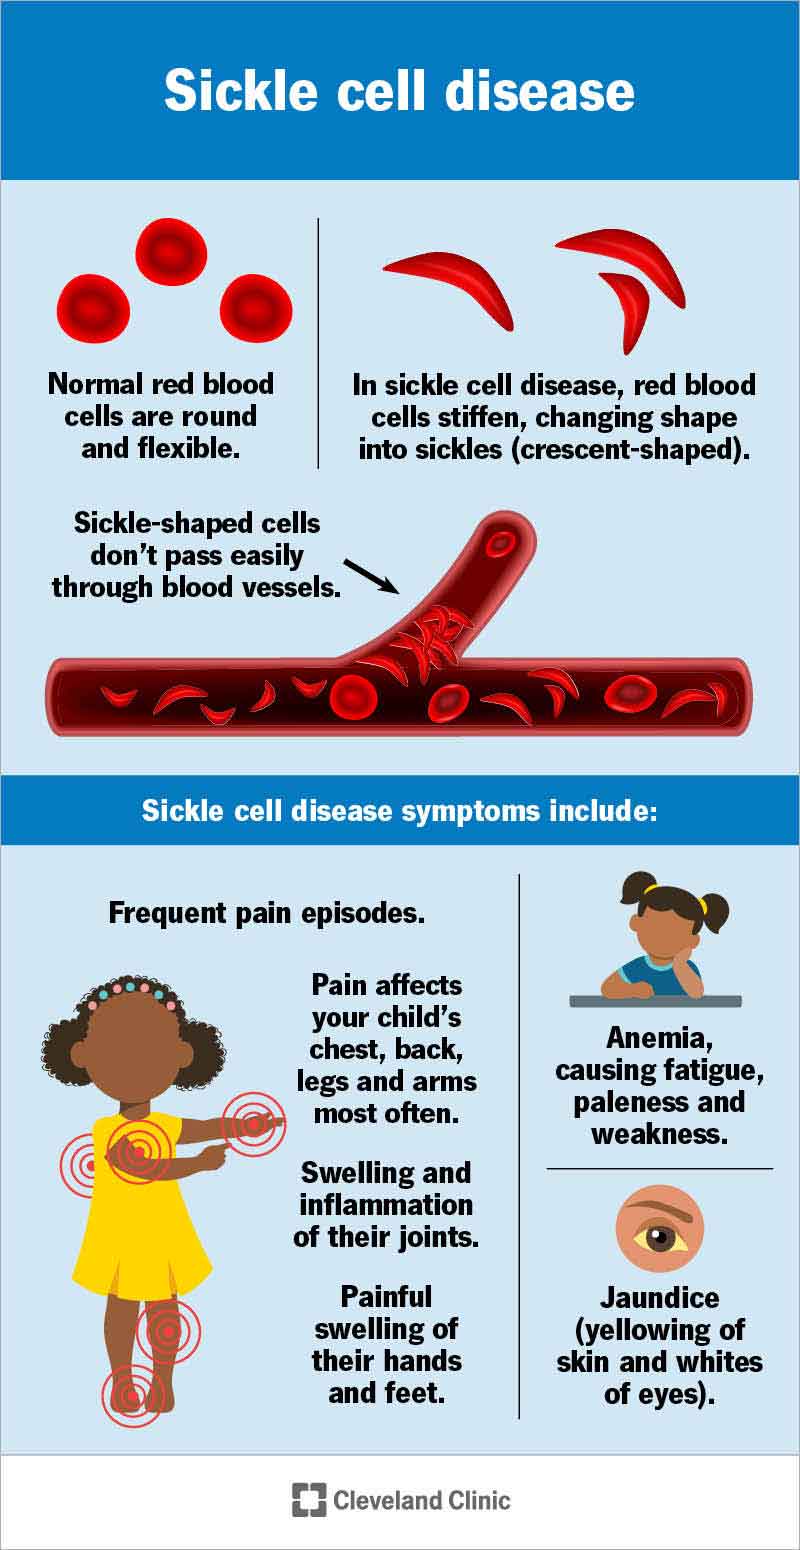 Sickle-shaped cells don’t pass easily through blood vessels, which can cause frequent pain episodes.